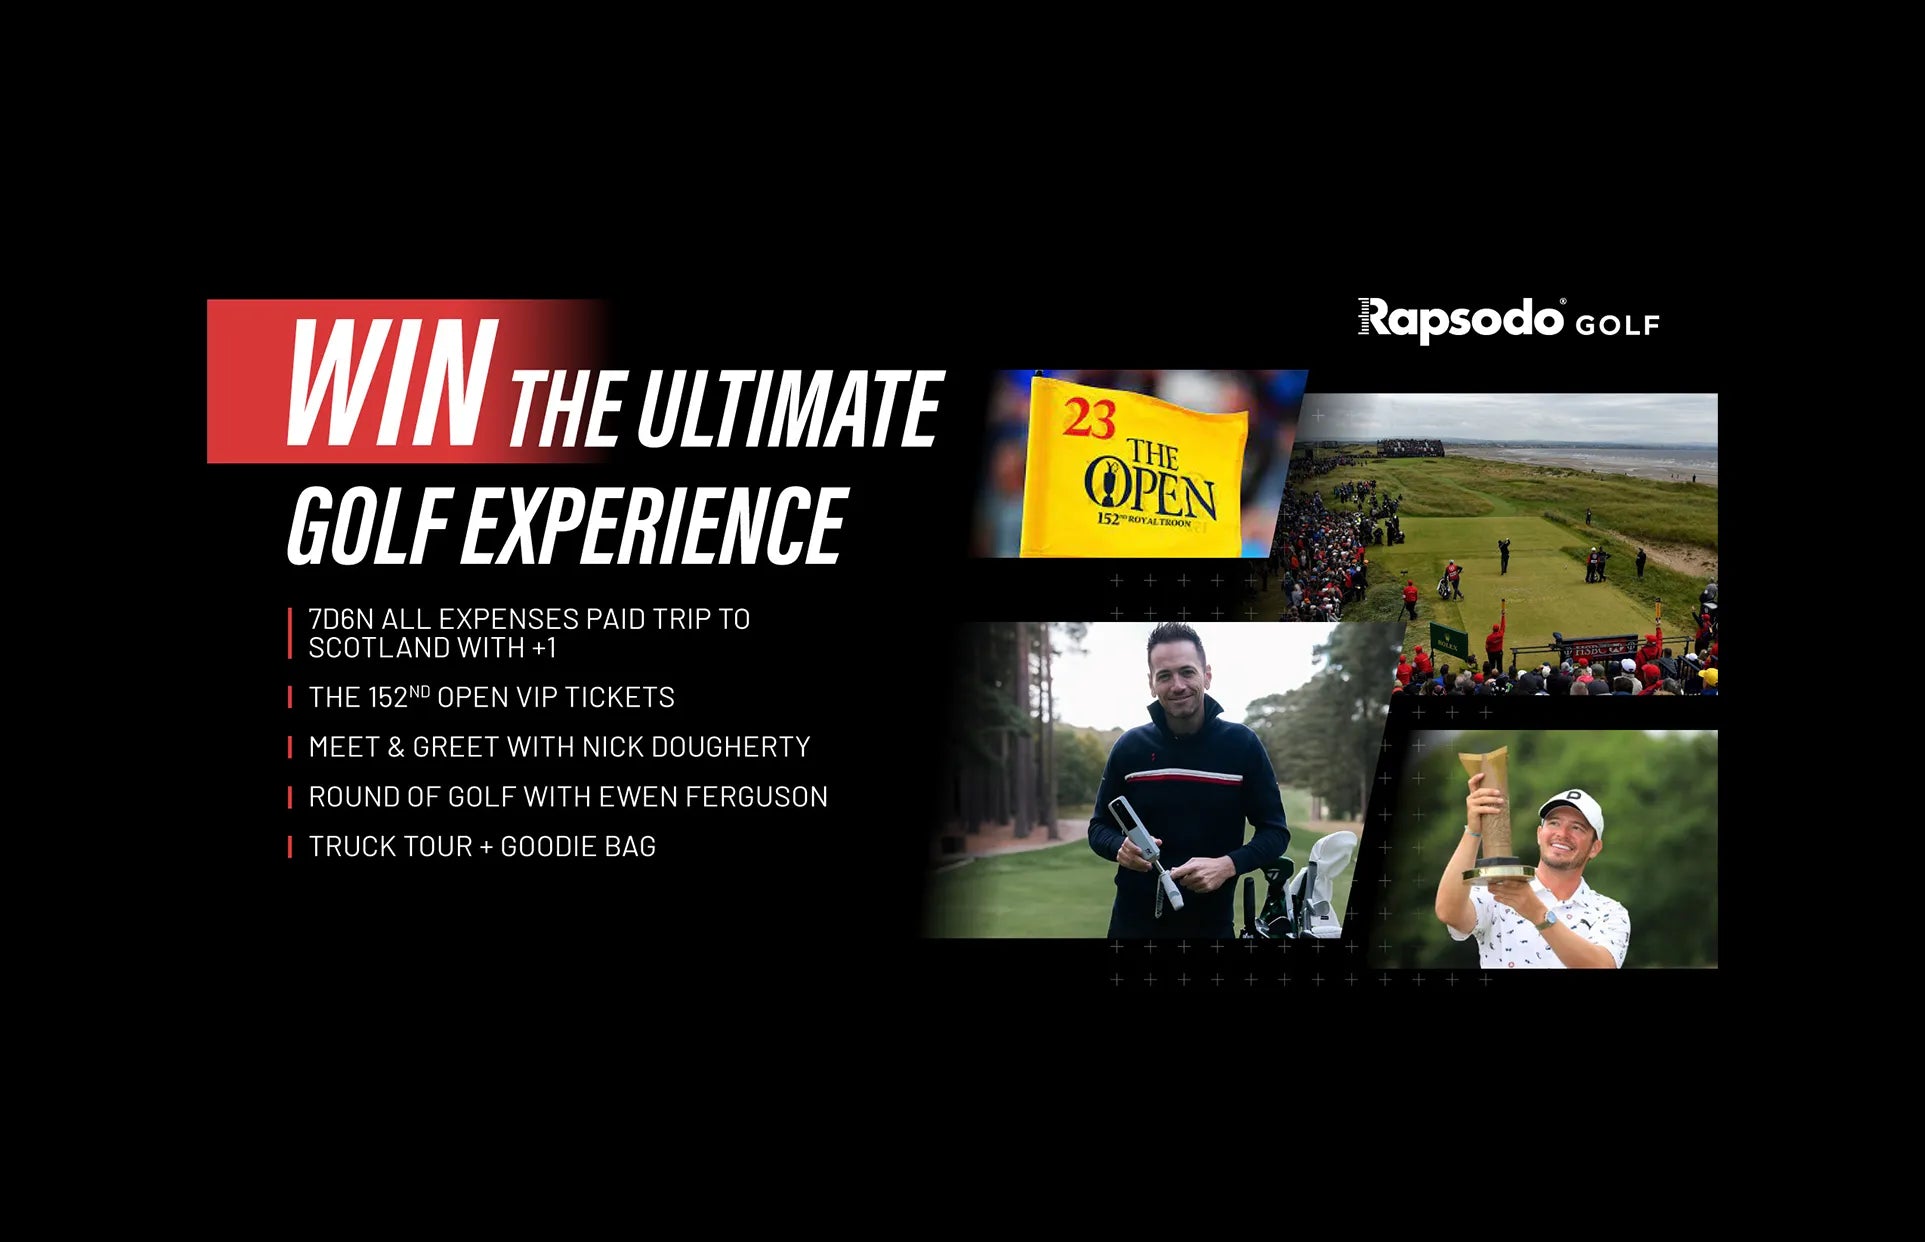 The Ultimate Golf Experience from Rapsodo